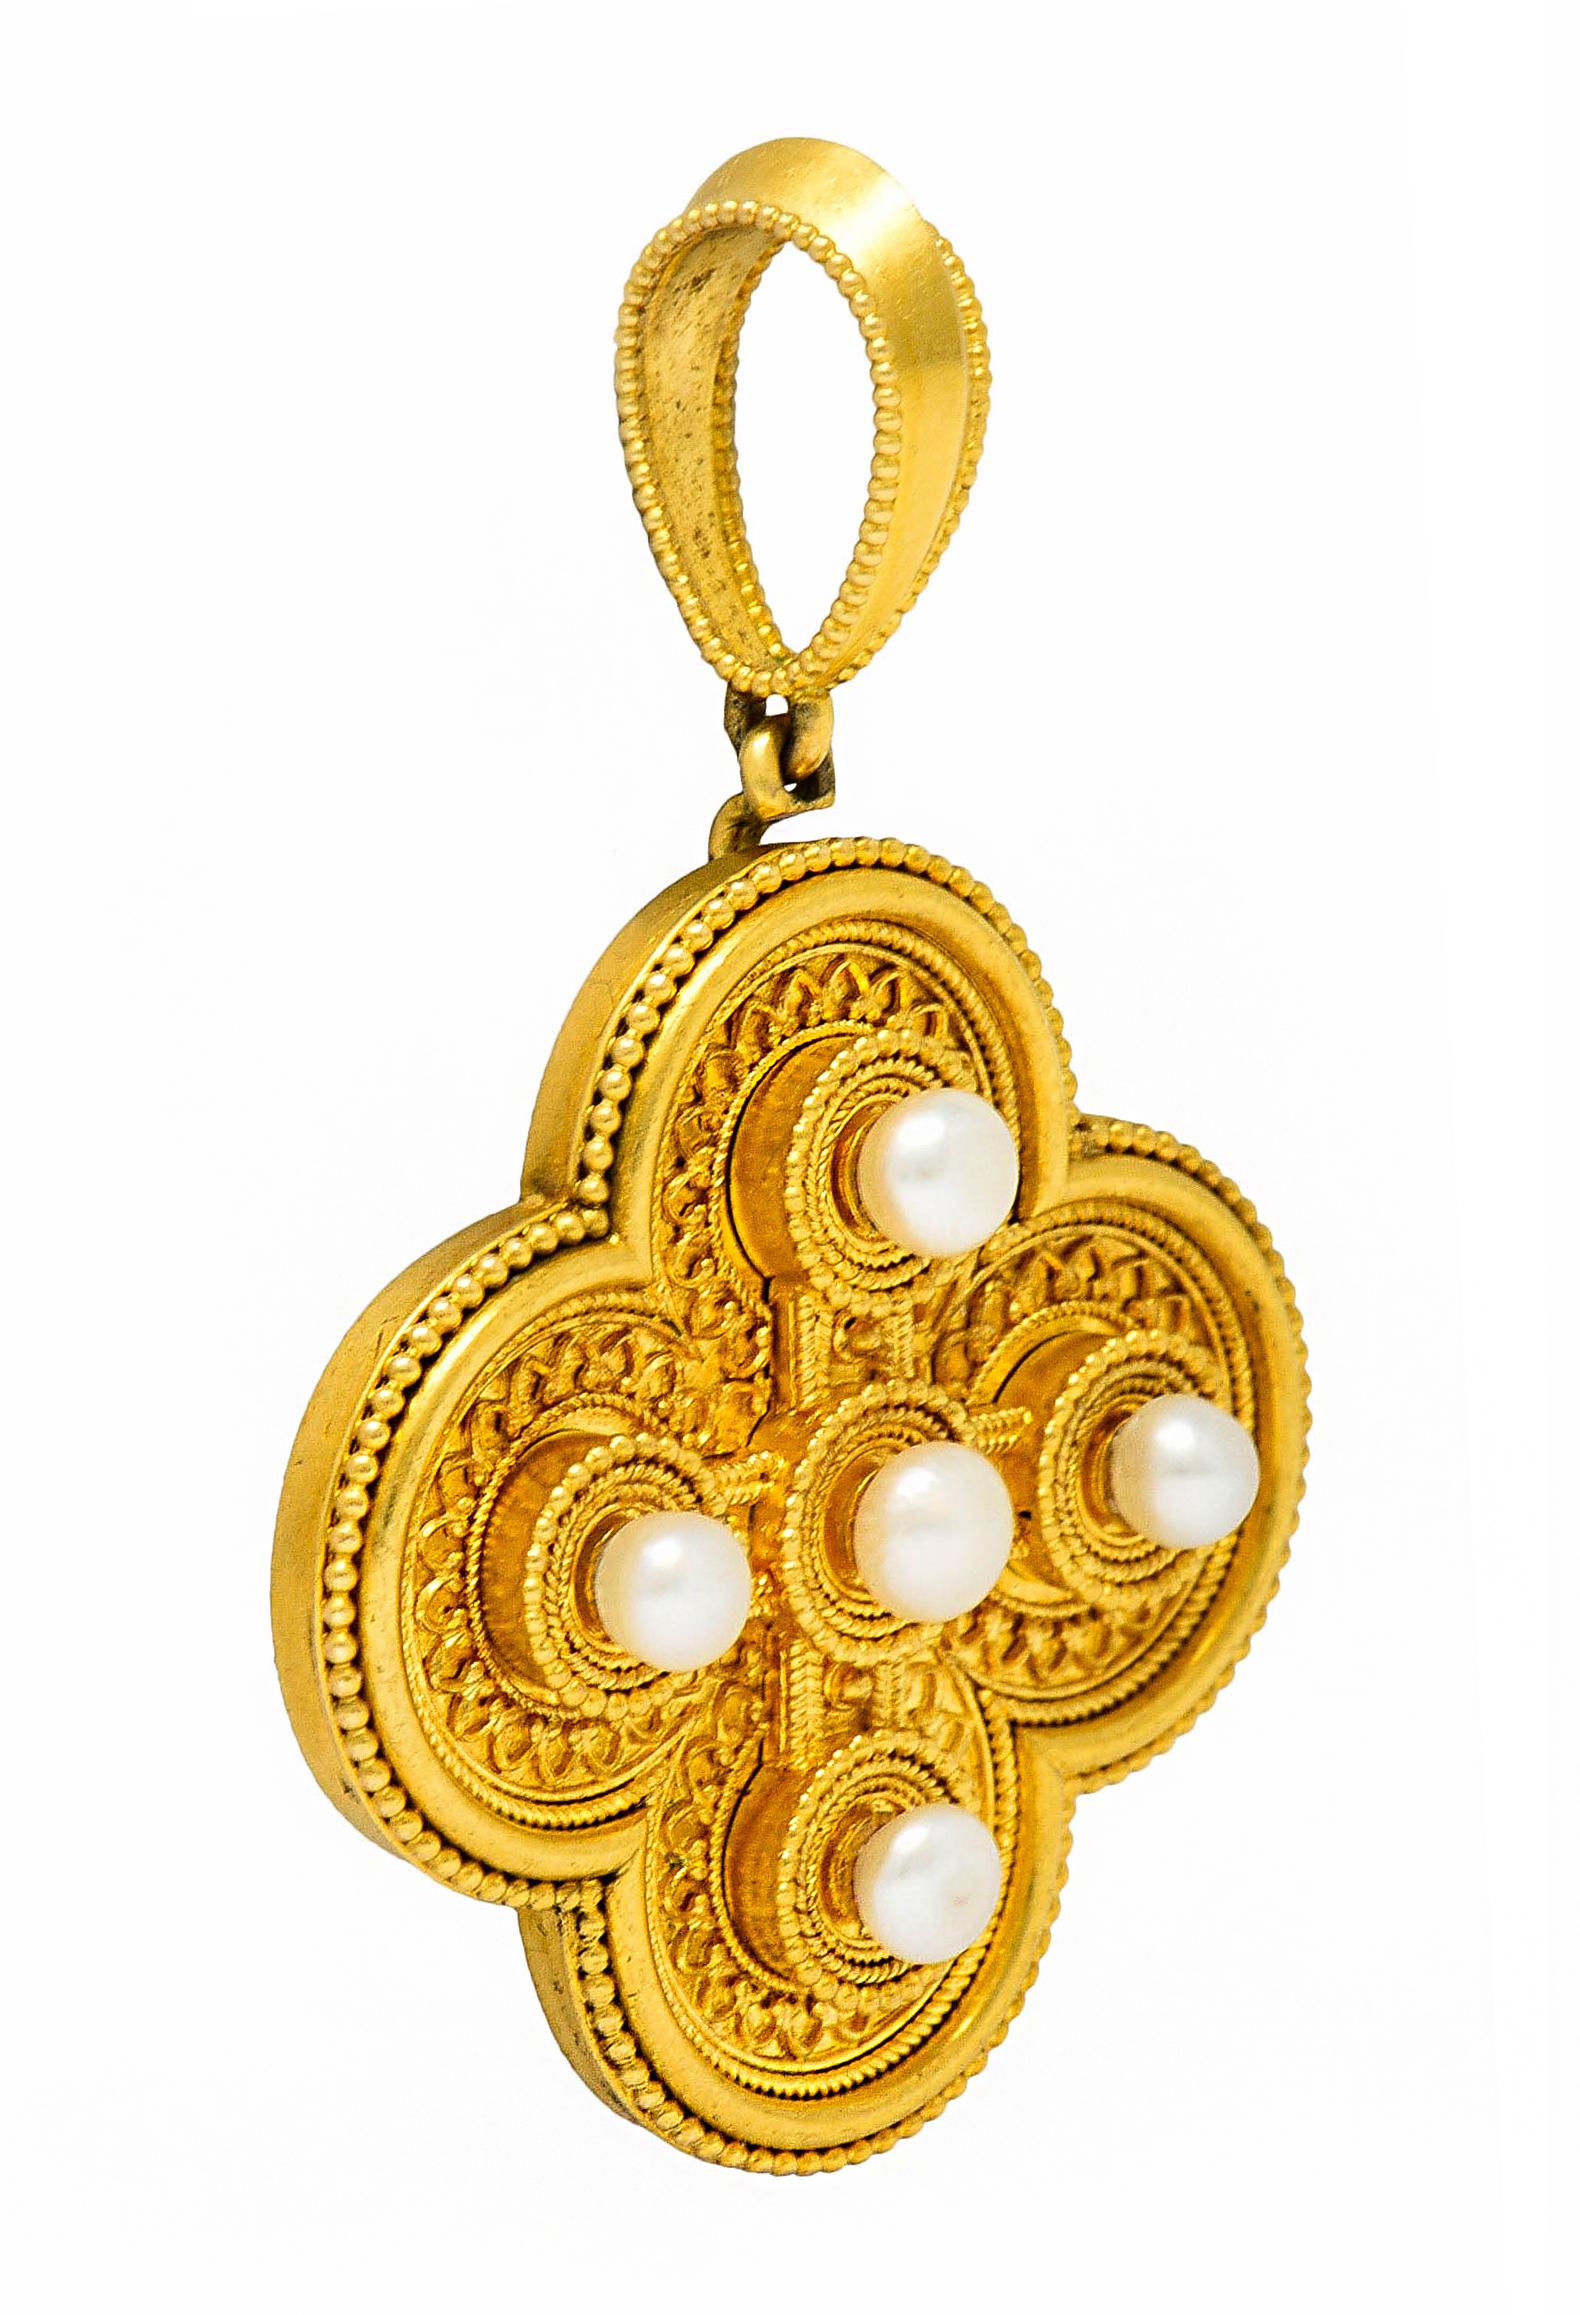 Pendant is a quatrefoil form decorated with twisted rope motif, gold beading, and a stylized foliate motif

Featuring four natural button pearls measuring from 4.0 mm to 5.0 mm

Well matched in white body color with moderate overtones and excellent